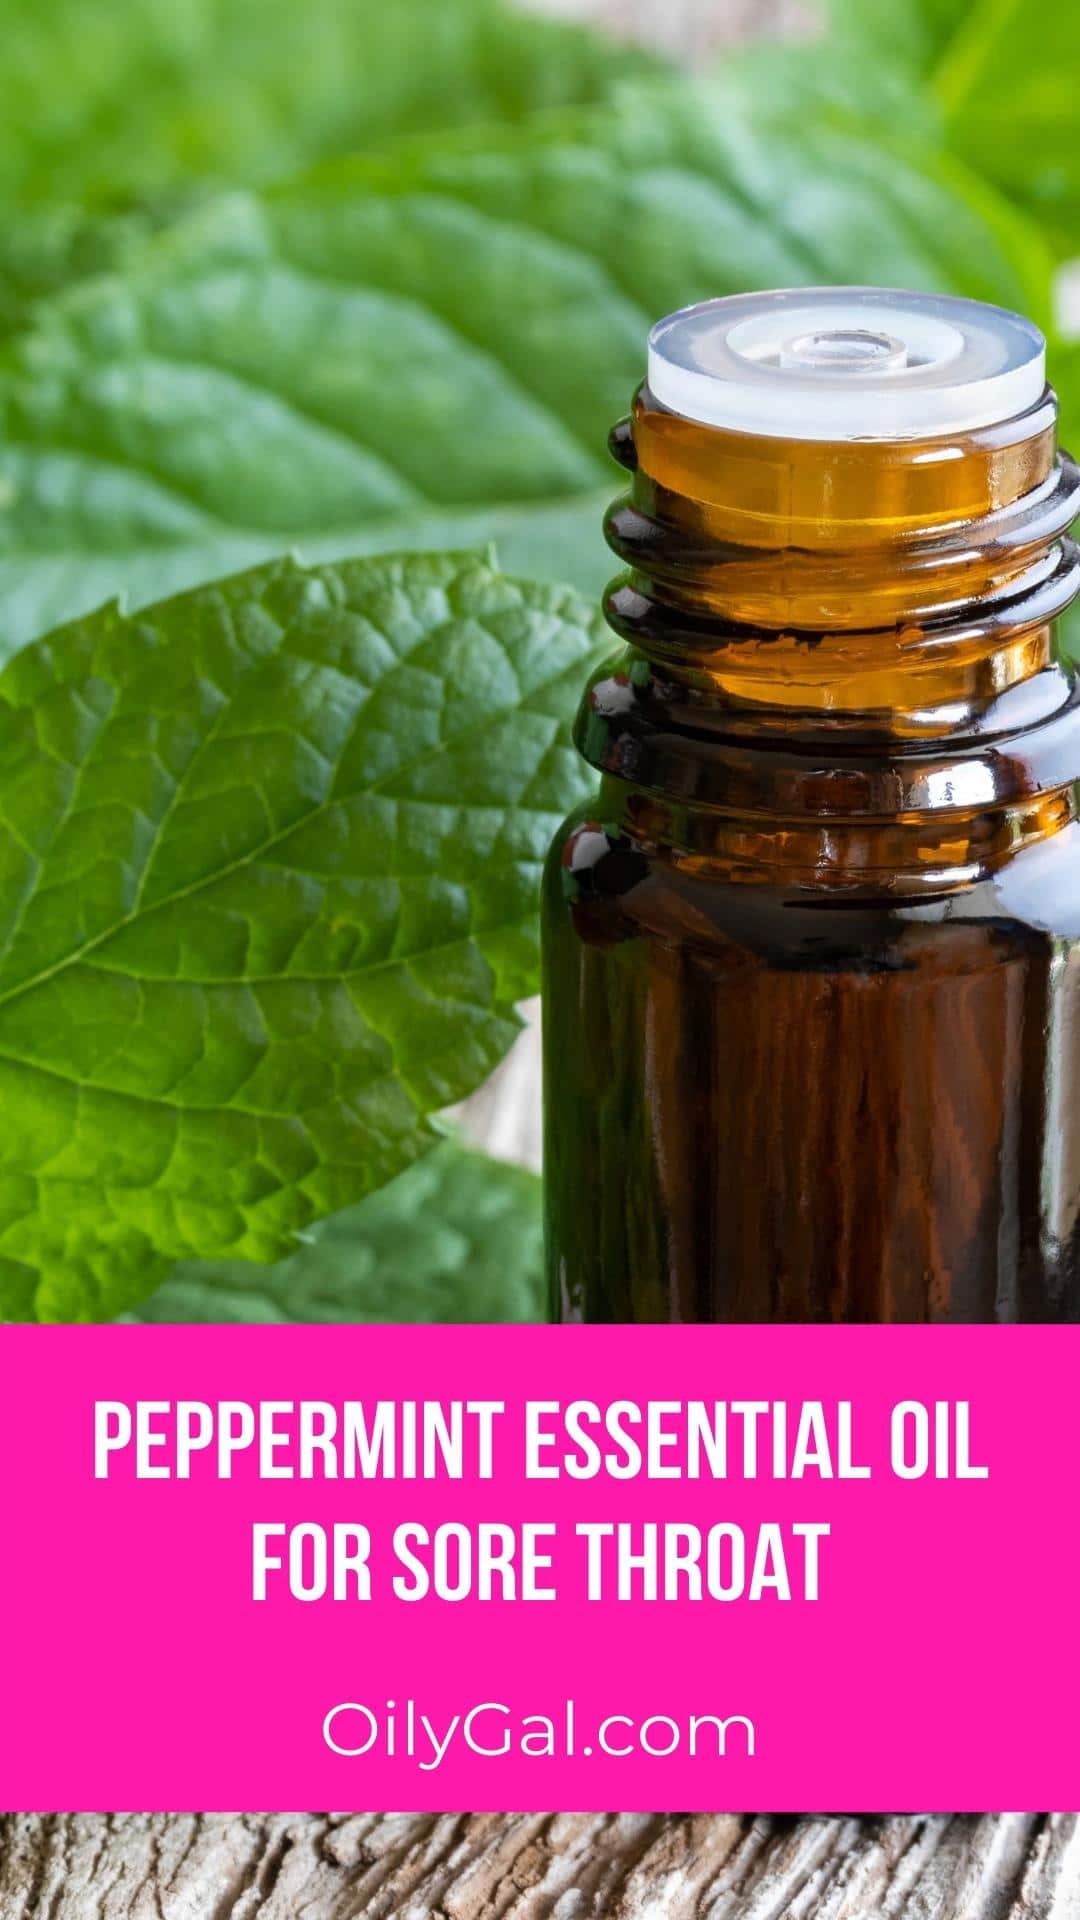 Peppermint Essential Oil for Sore Throat